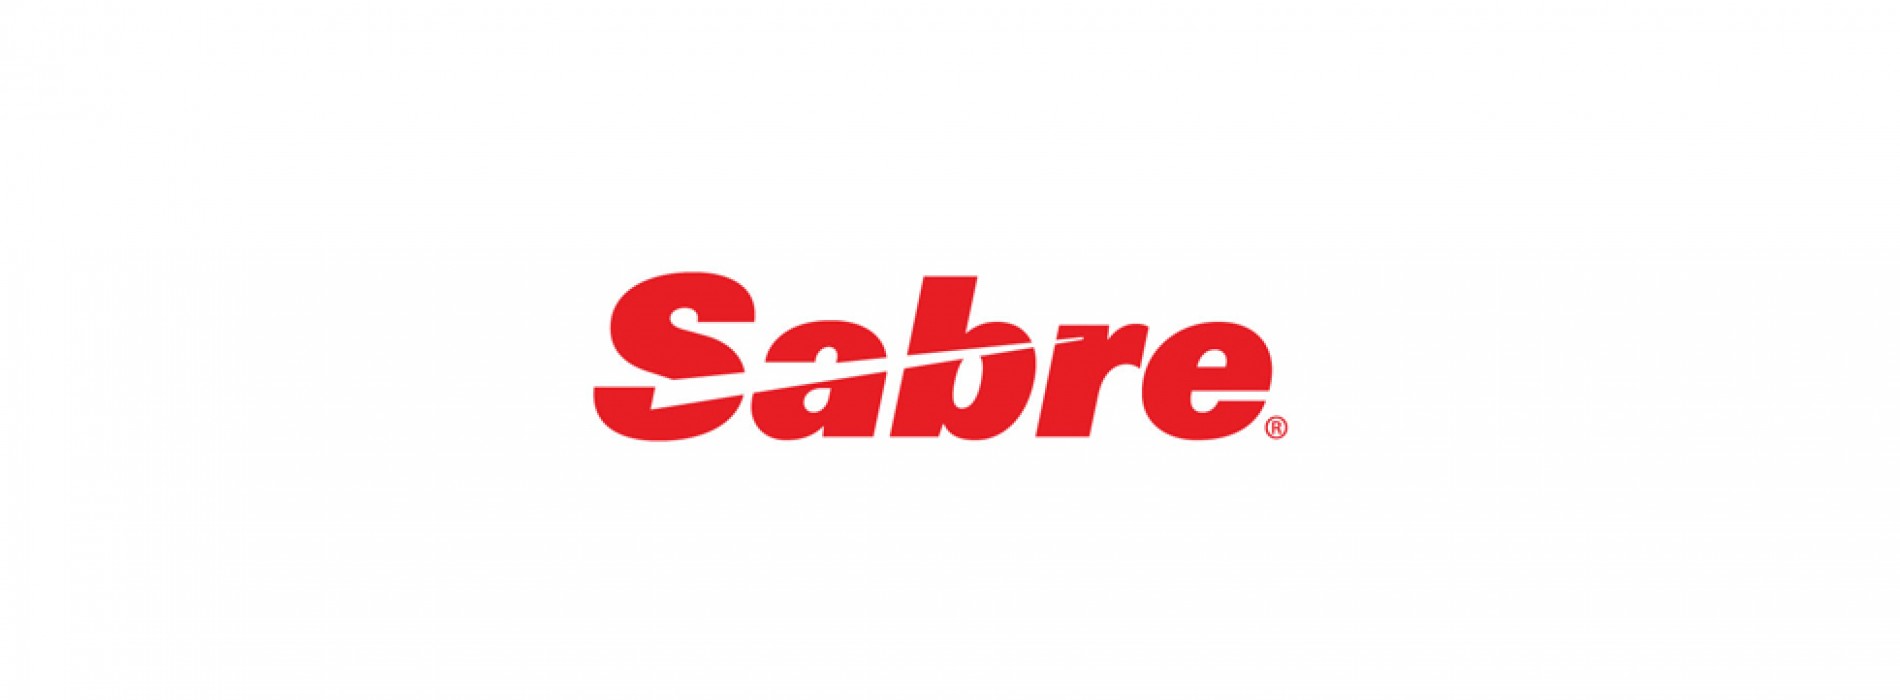 Hong Kong Airlines joins the Sabre Airline Solutions global customer community